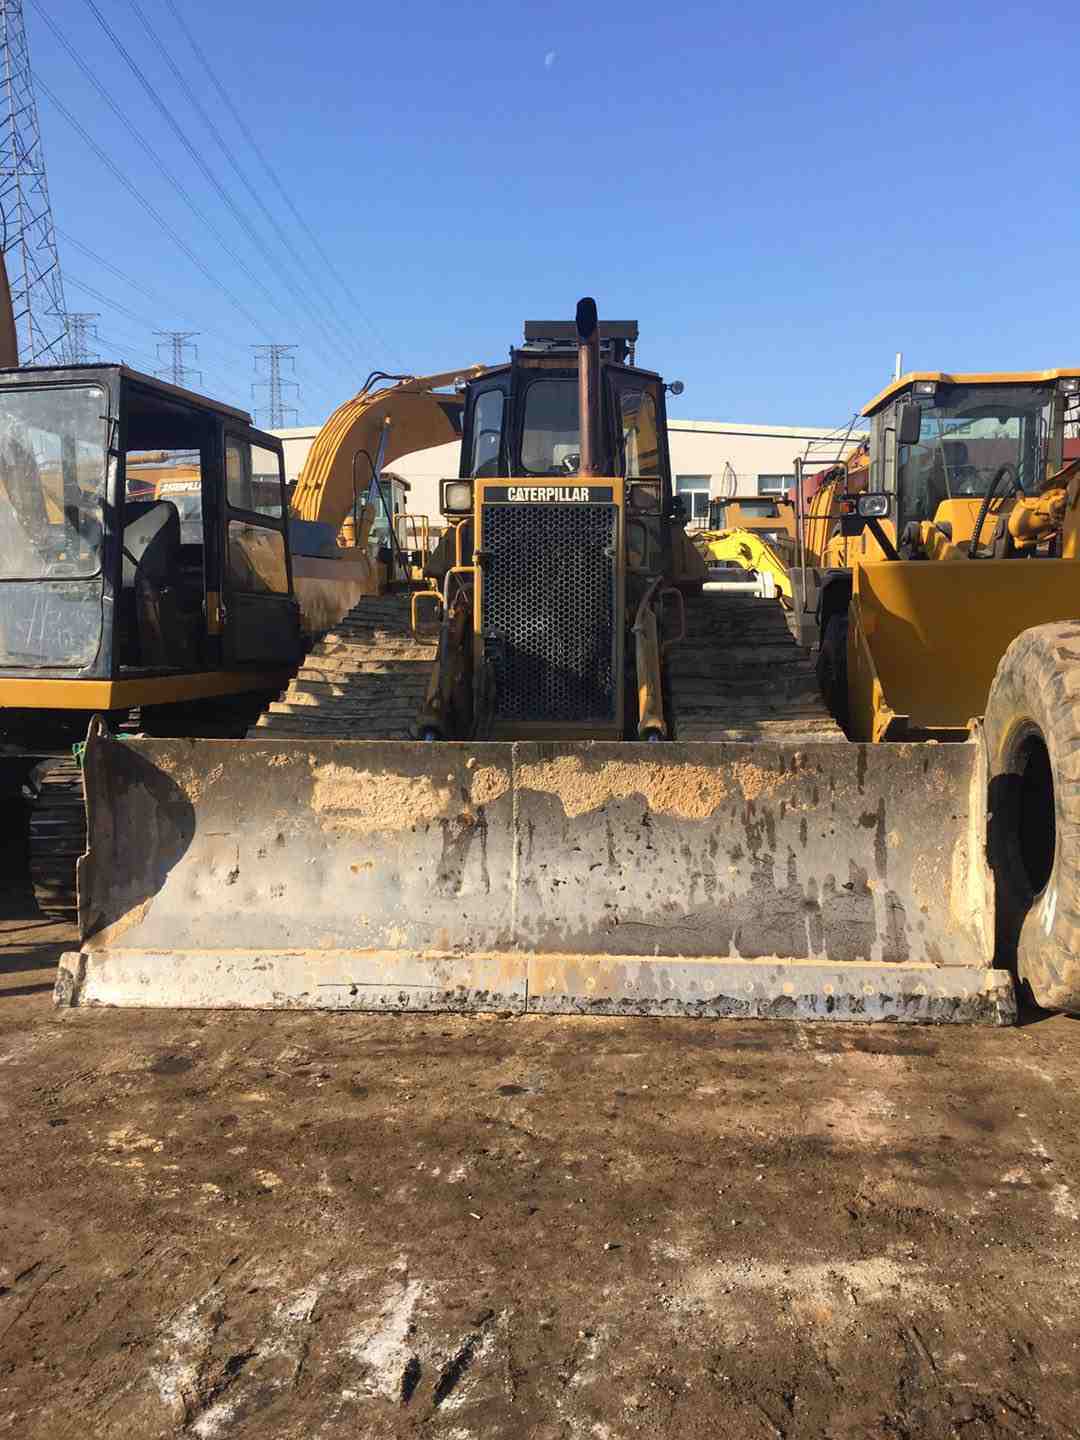 Used Cat D5h Bulldozer Secondhand Caterpillar D5h Bulldozer for Hot Sale in Low Price